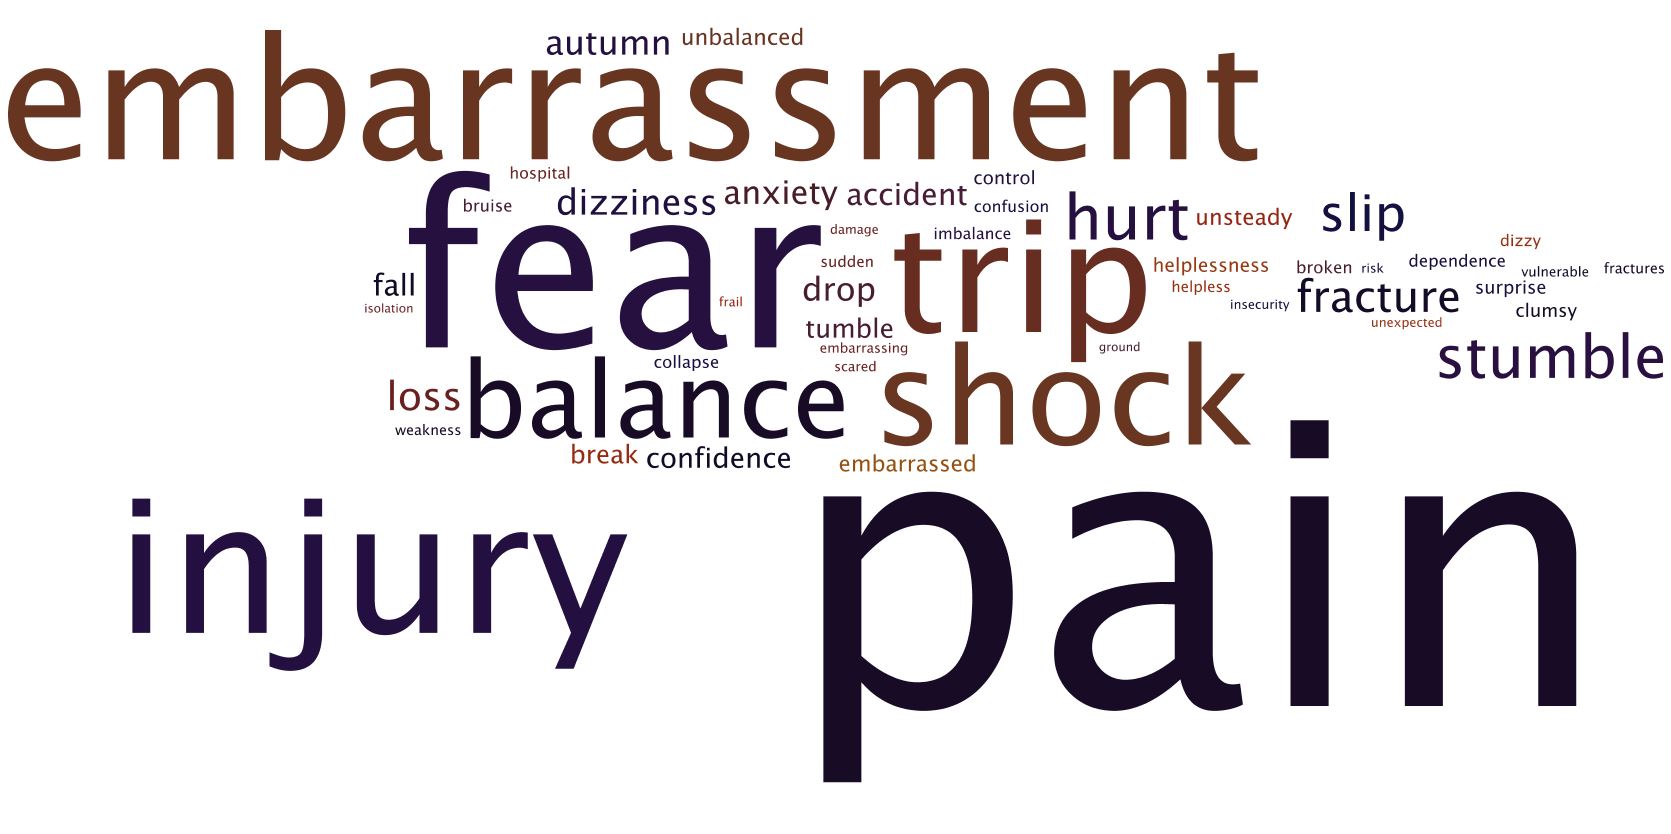 wordcloud of most frequently used words